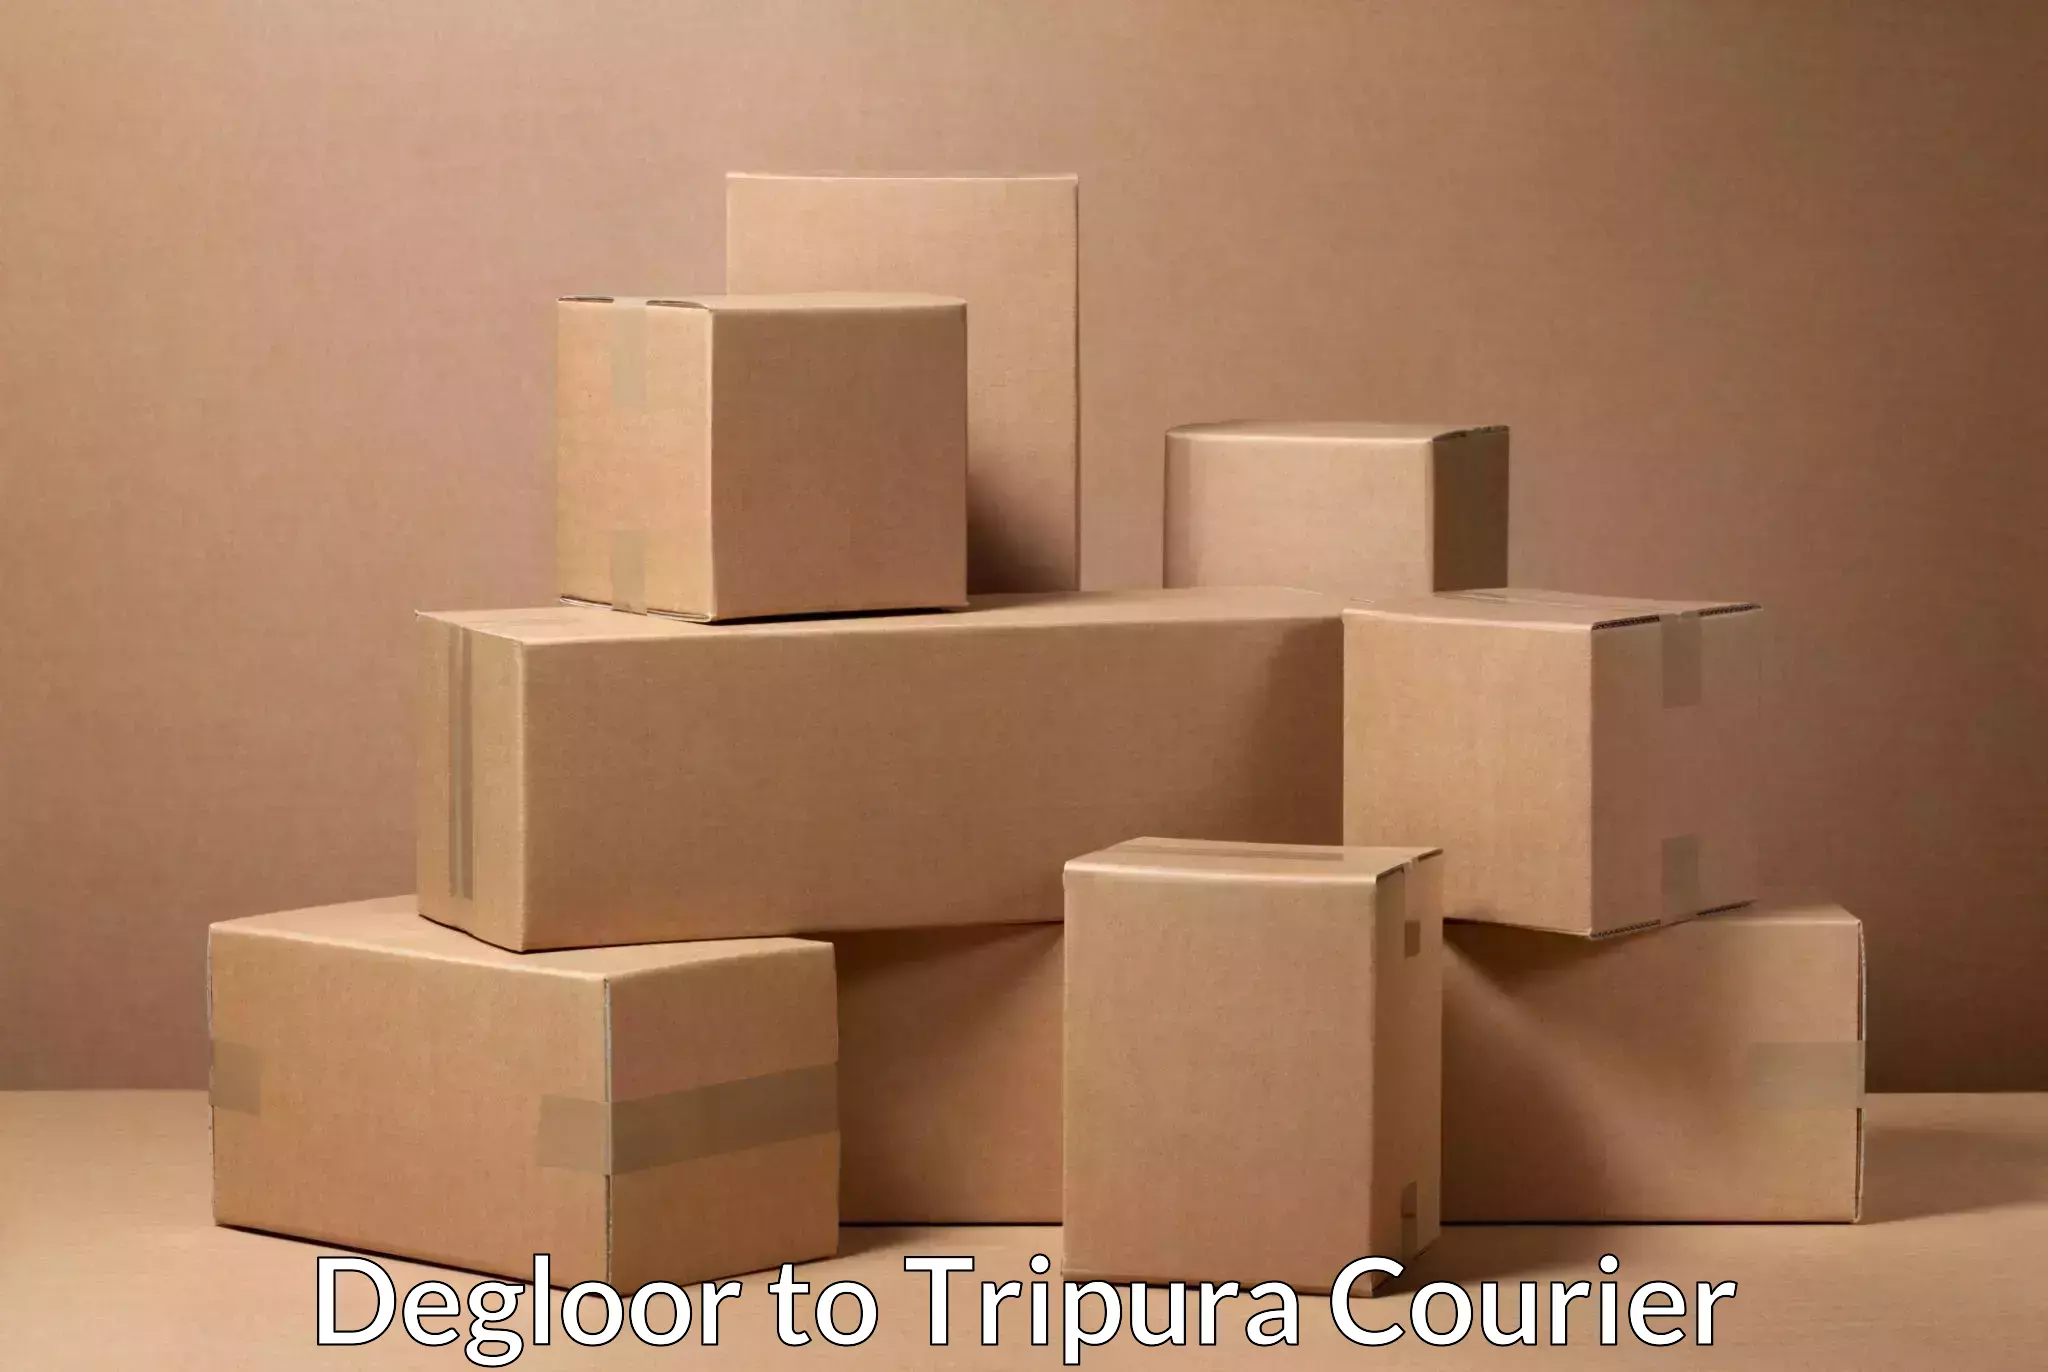 End-to-end delivery Degloor to Tripura